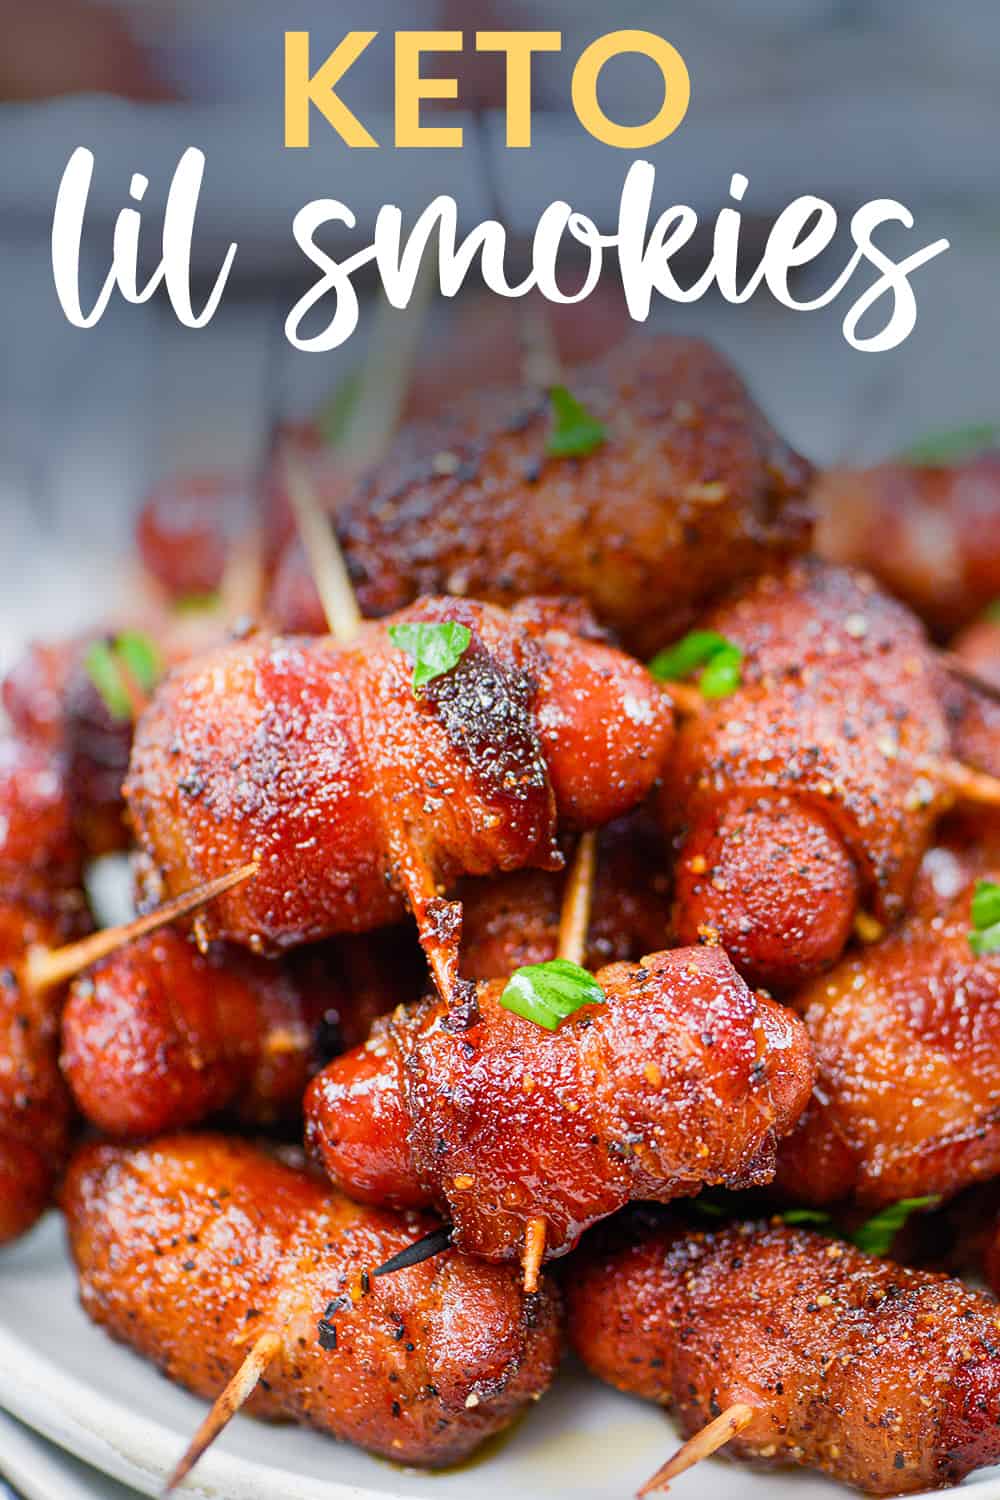 Lil smokies wrapped in bacon with toothpicks.